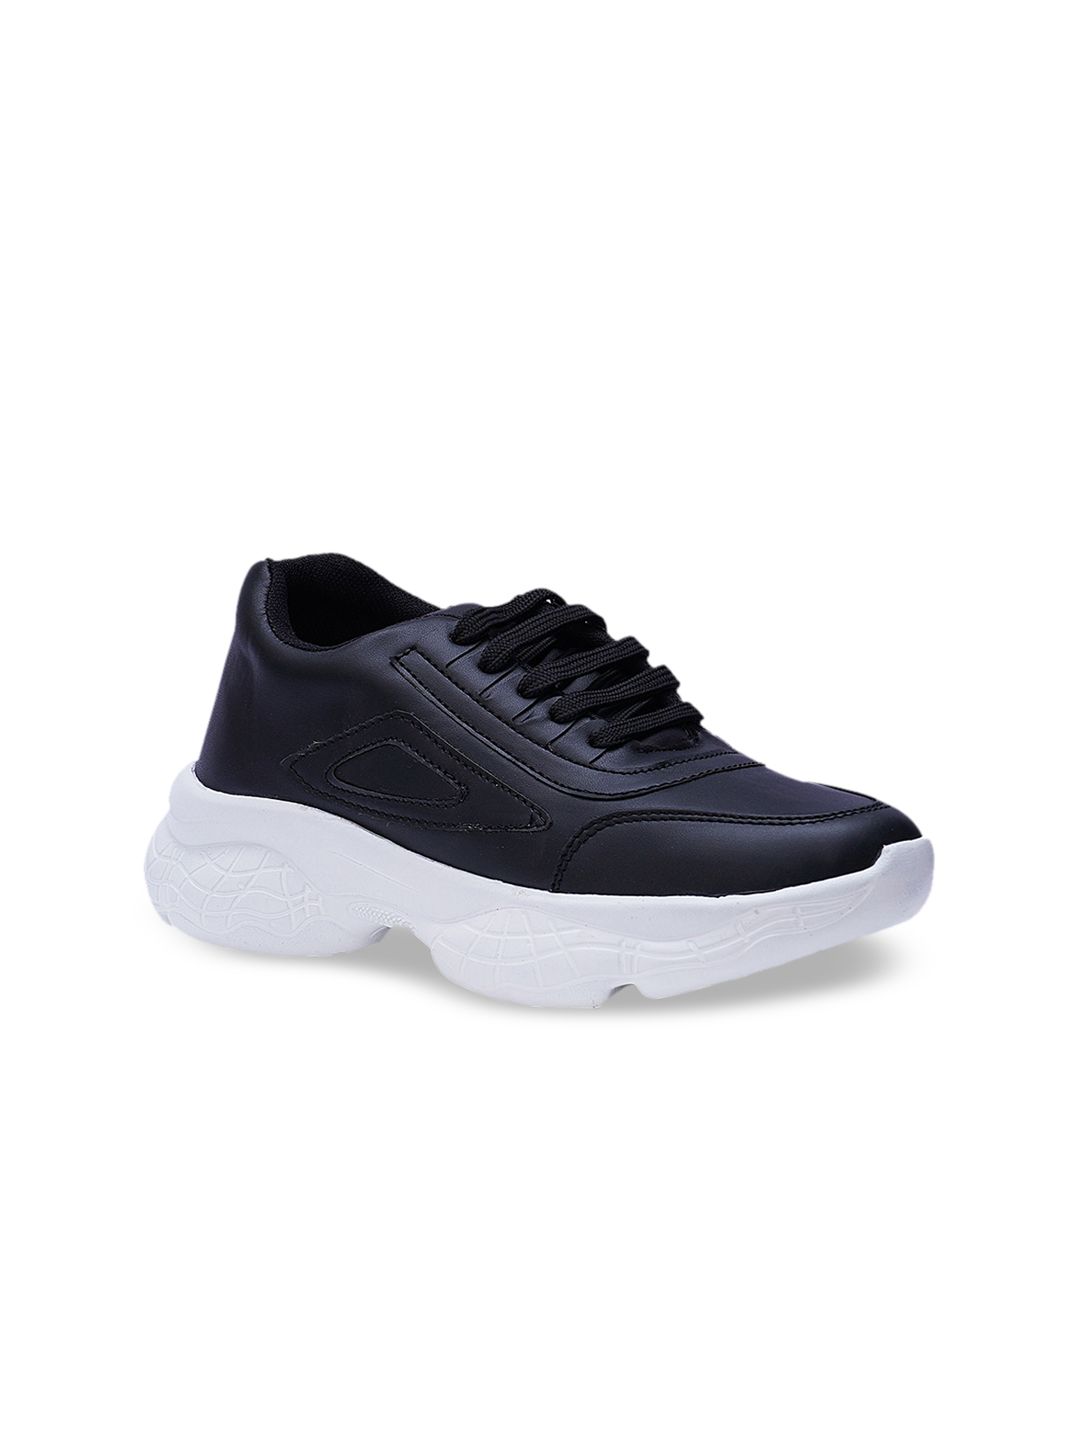 HERE&NOW Women Black PU Sneakers Price in India